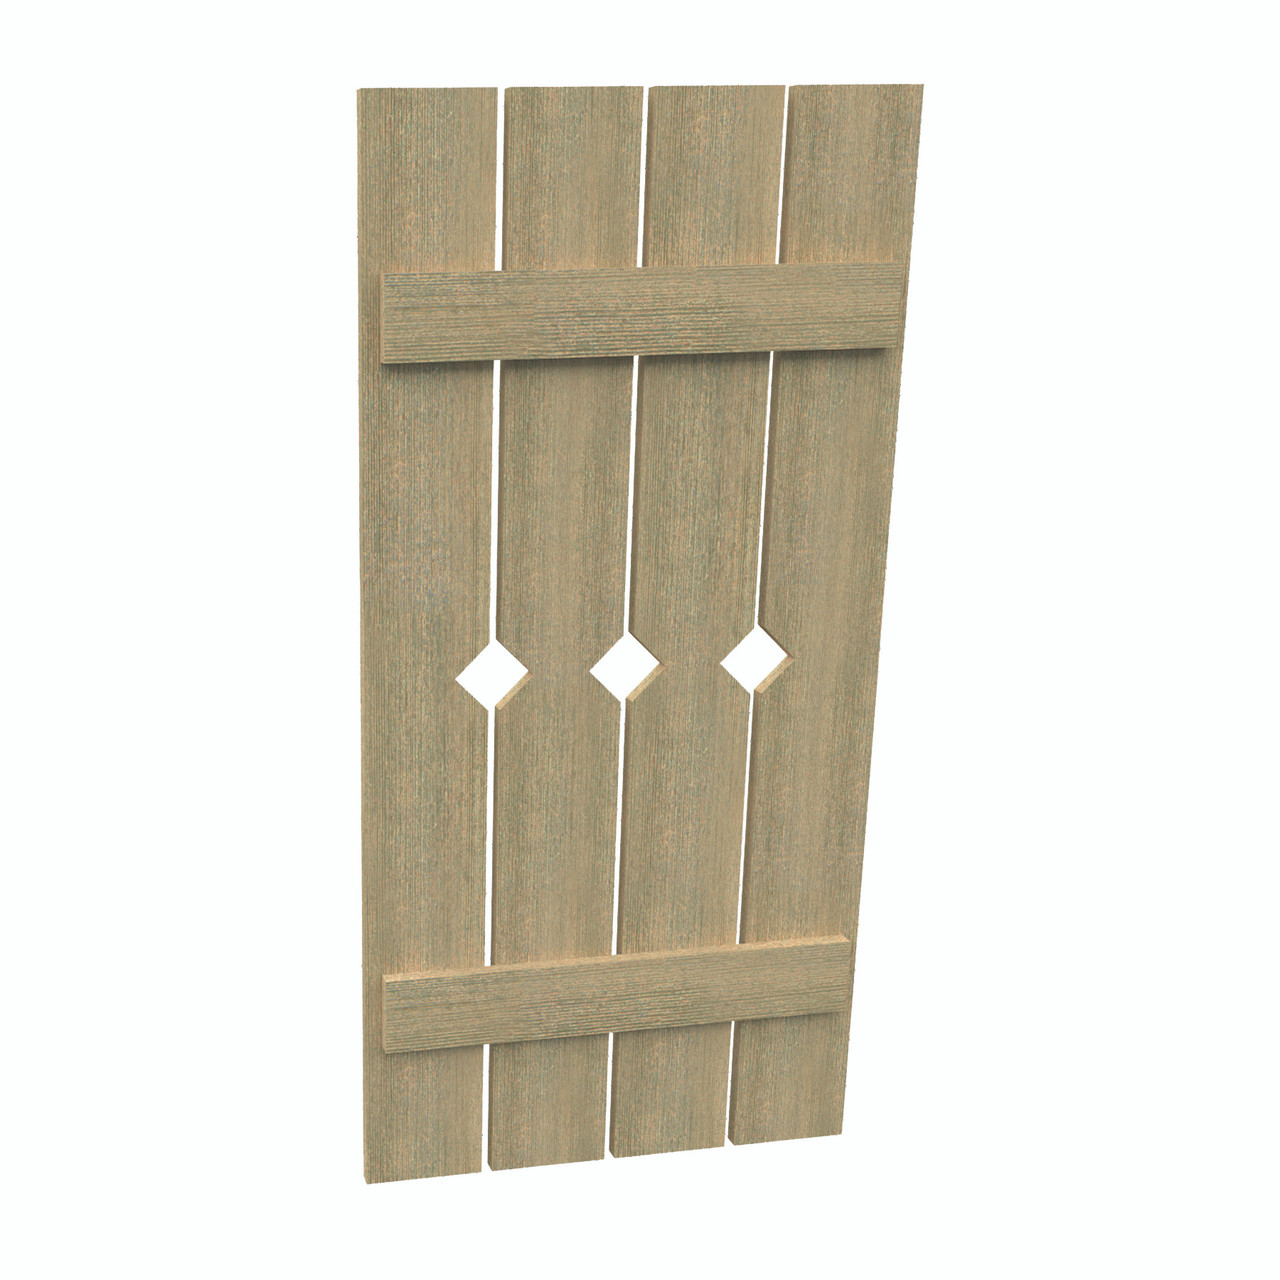 24 inch by 58 inch Plank Shutter with 4-Plank, Diamond